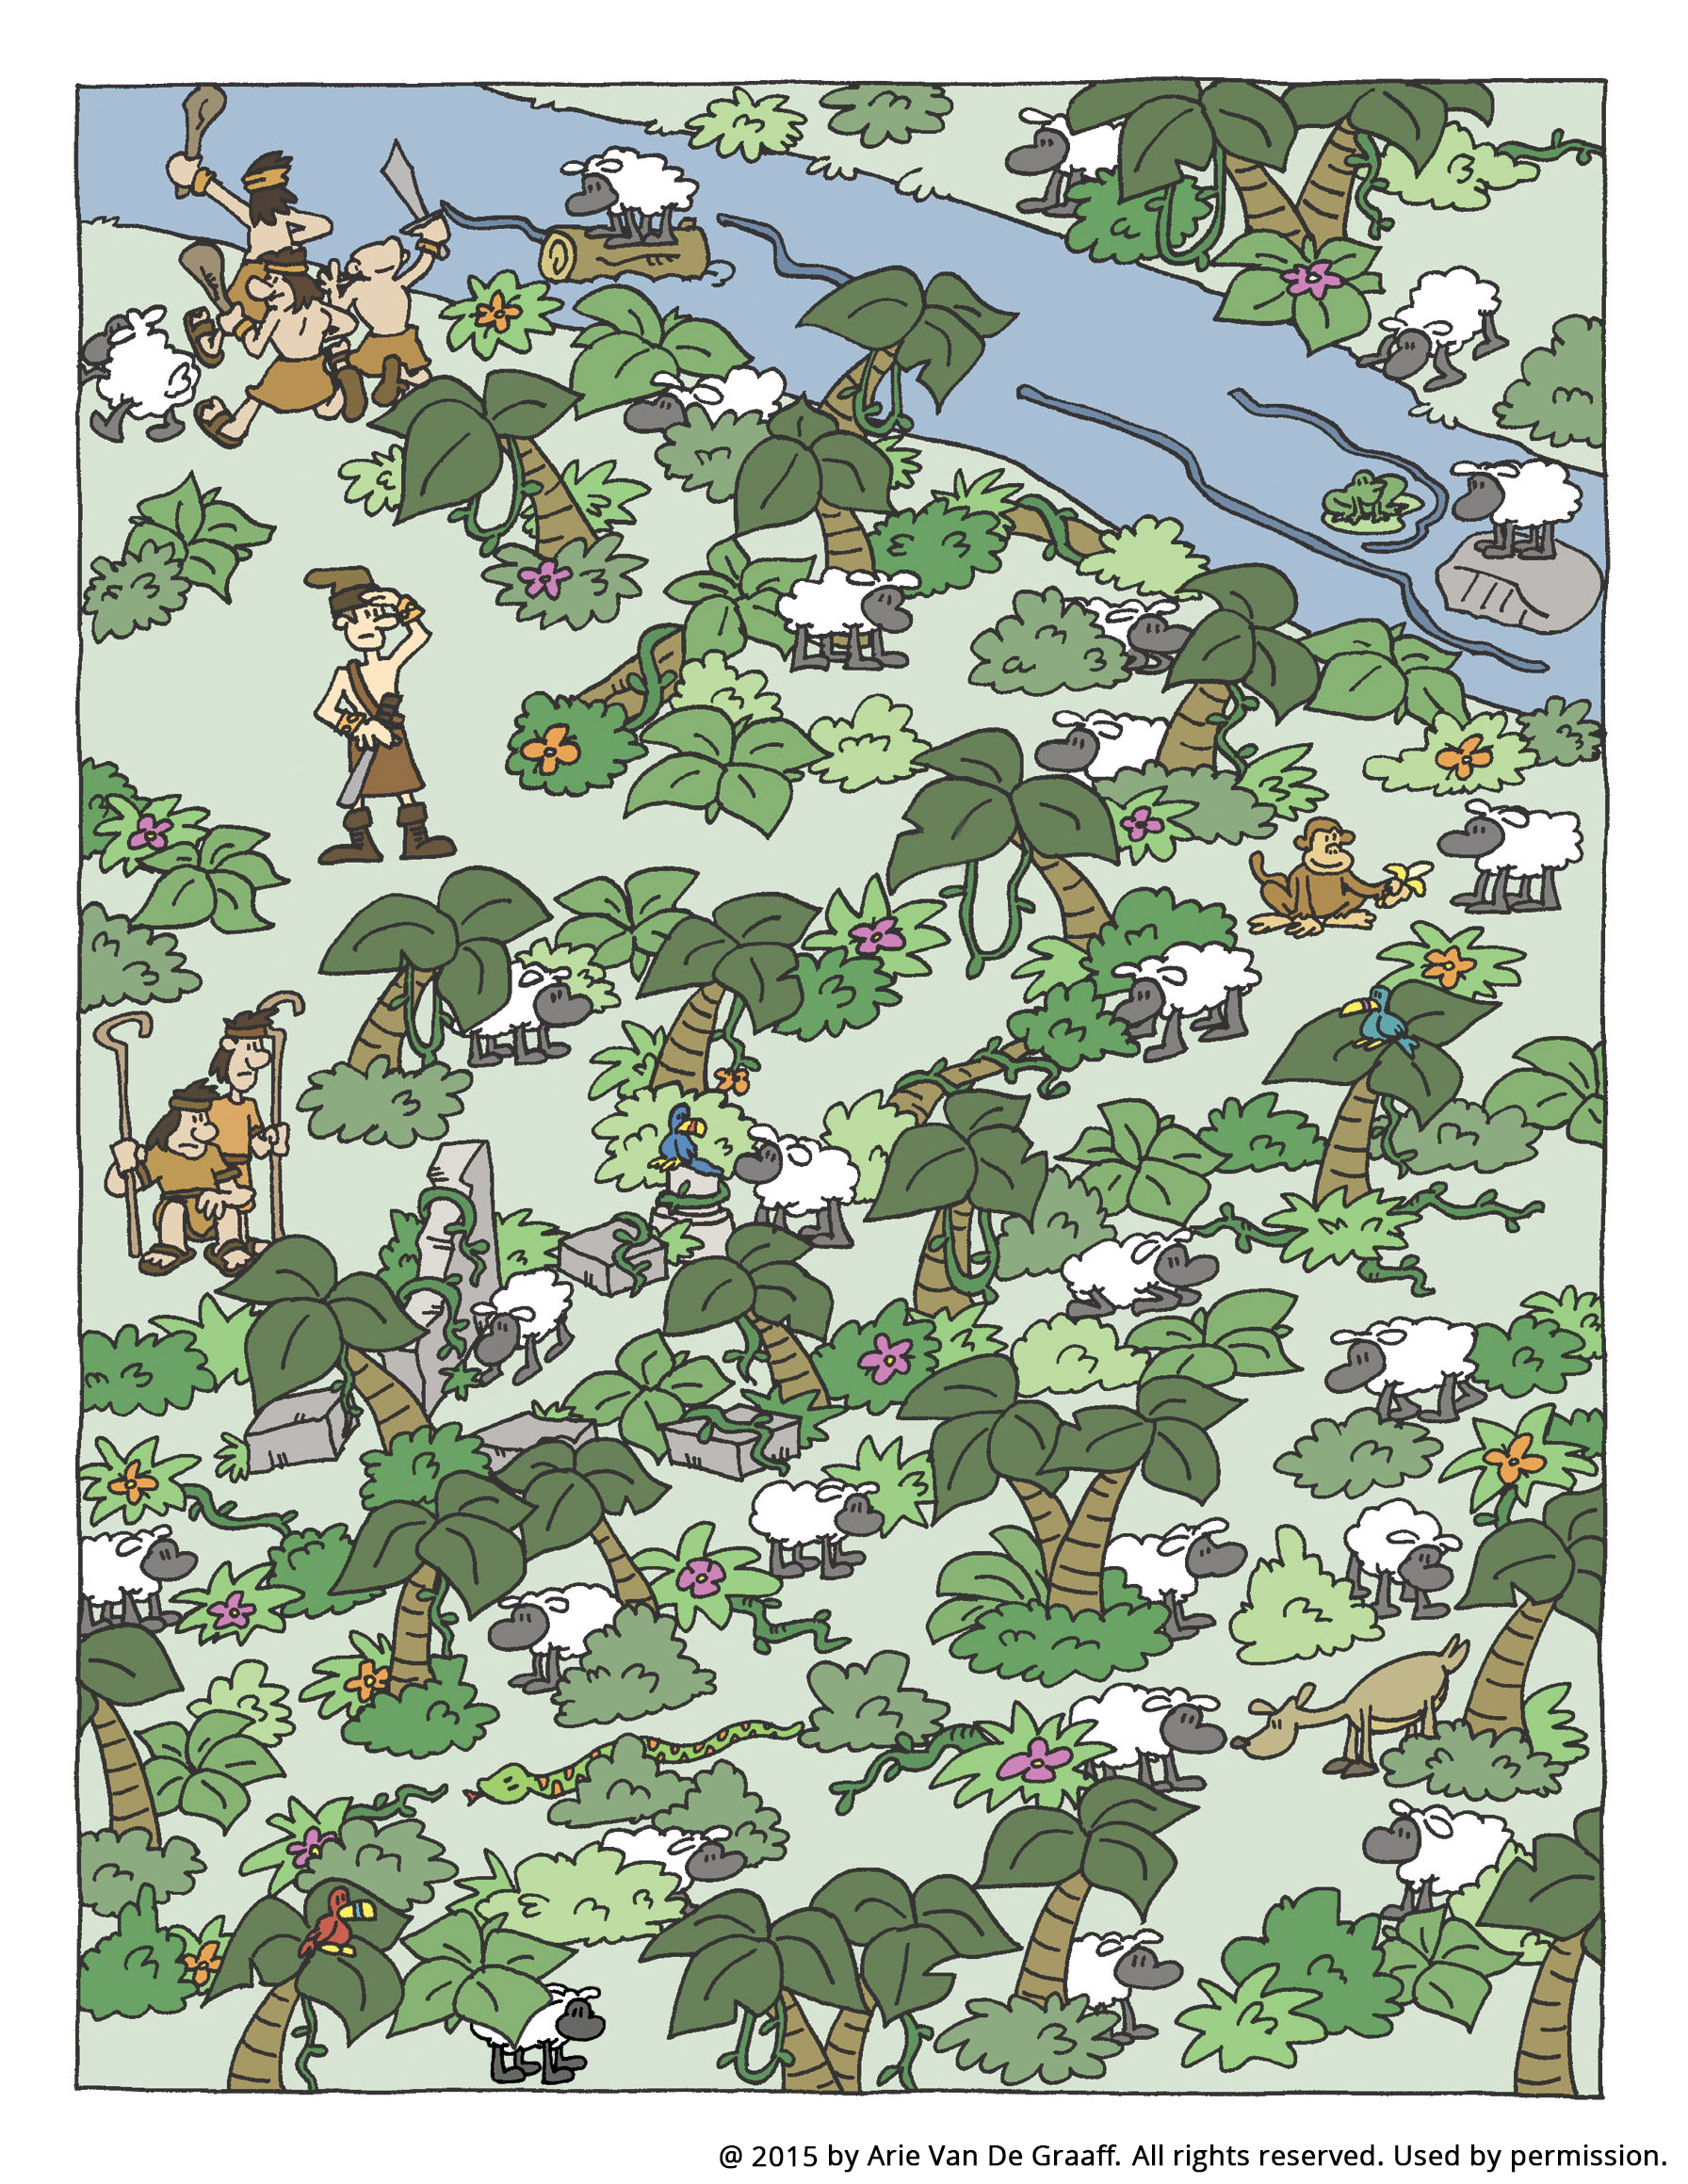 A colored scene of a river, trees, and Lamanites scattering King Lamoni’s sheep, which the children need to find and count.